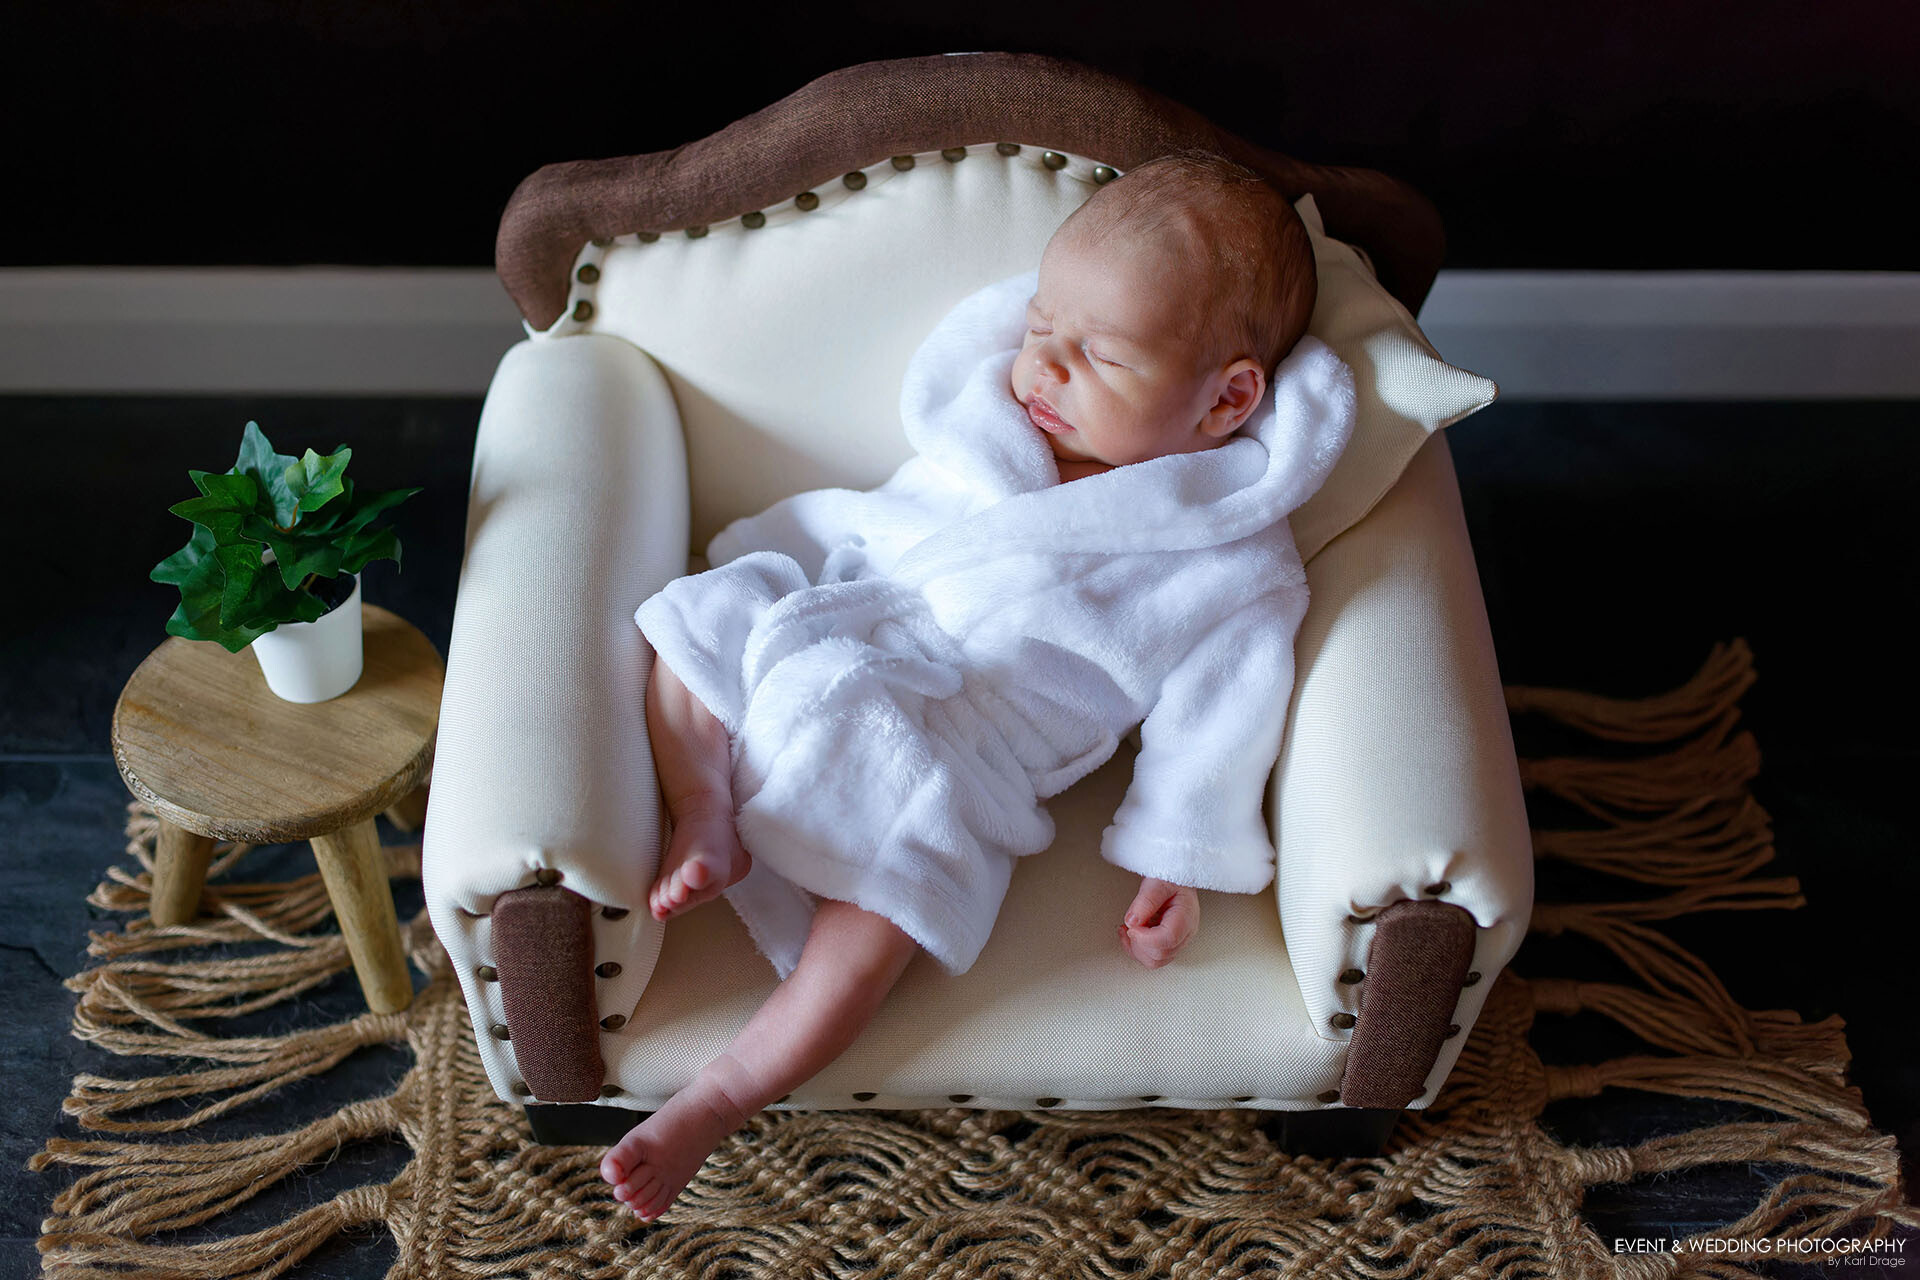 Newborn baby boy wearing a white dressing gown asleep on a white and brown upholstered sofa.